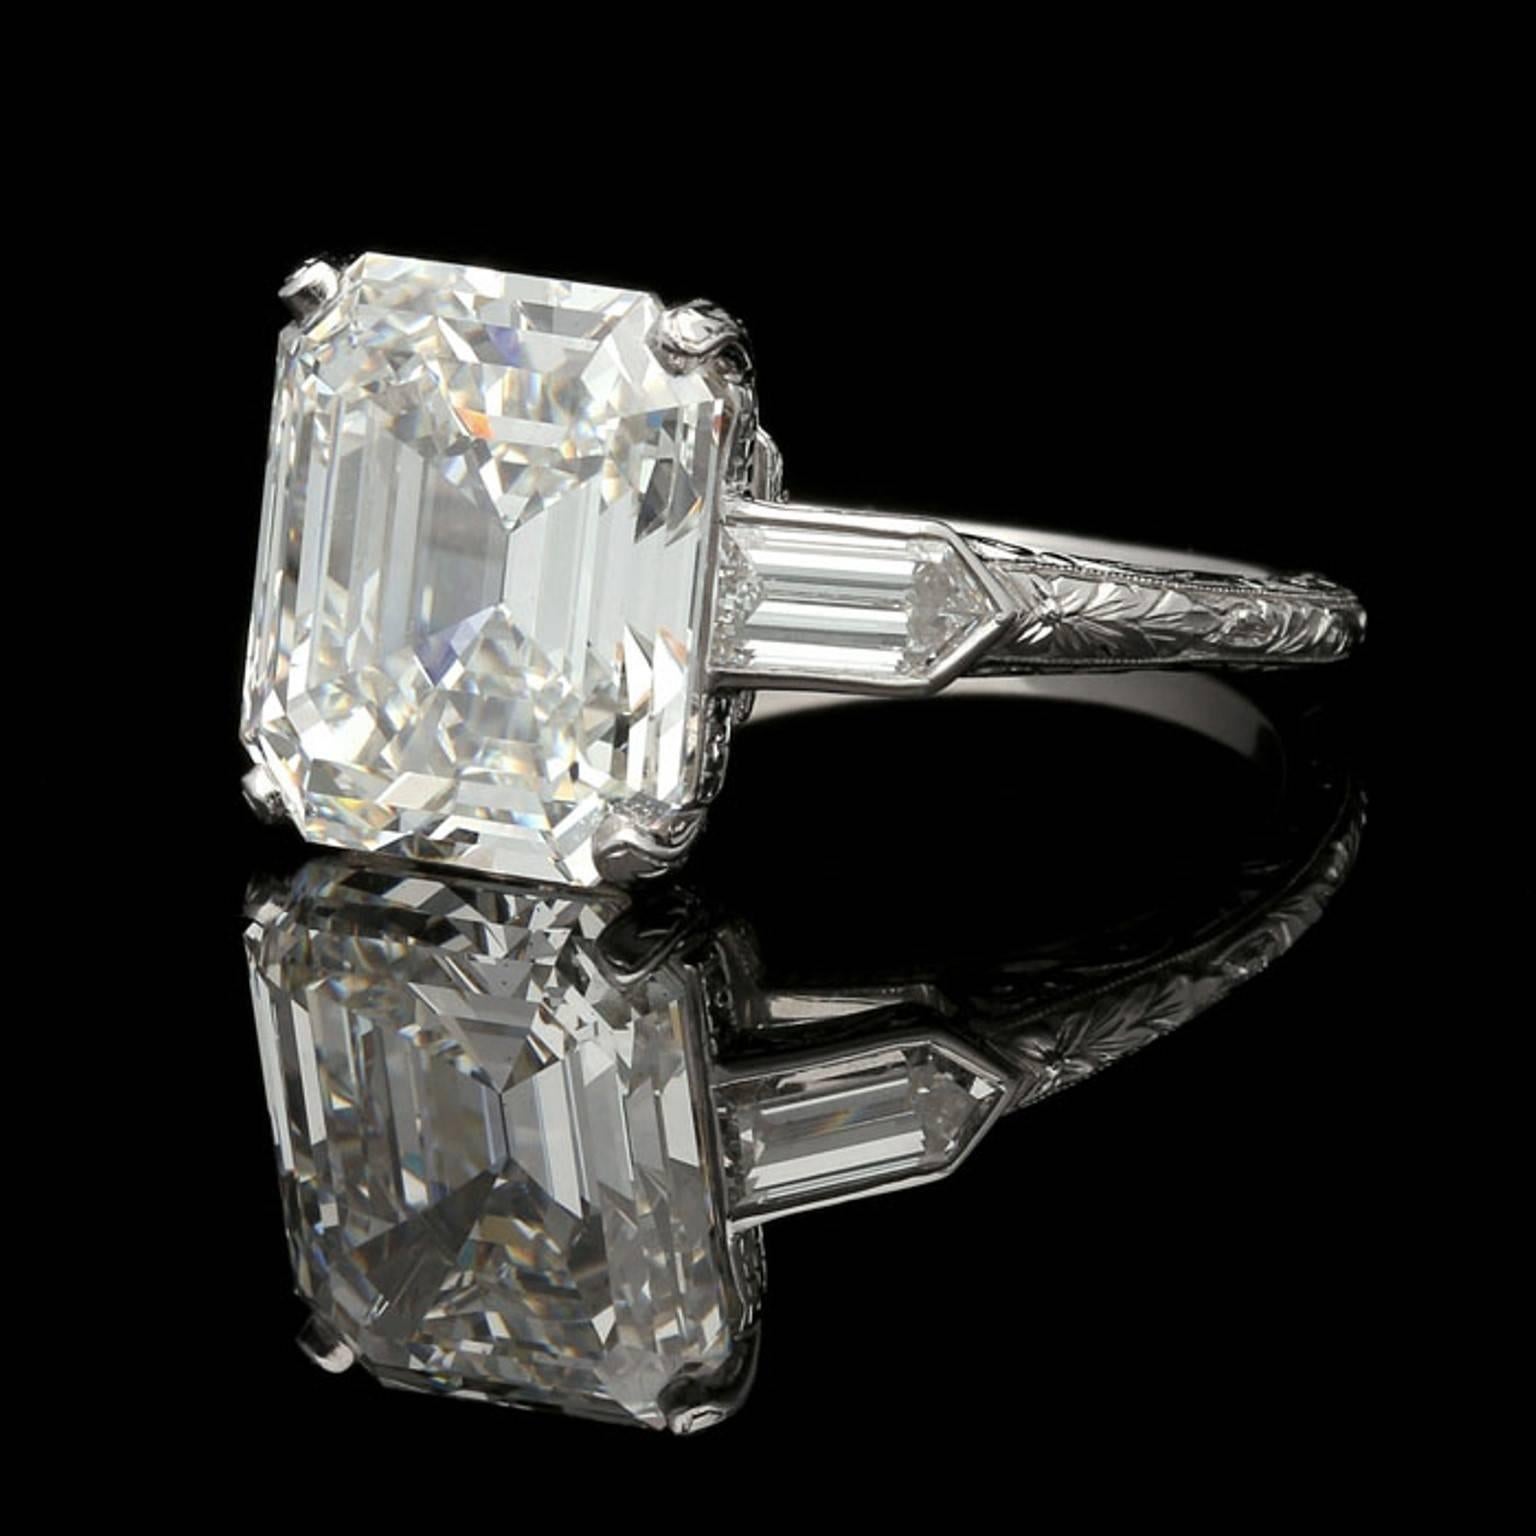 6.24Carat I VS2 Emerald cut diamond with GIA certificate 
Platinum
UK finger size M 1/2, US size 6.75, can be adjusted to your own finger size
5.9 grams

An elegant emerald cut diamond ring by Hancocks, the ring set with a beautiful emerald cut